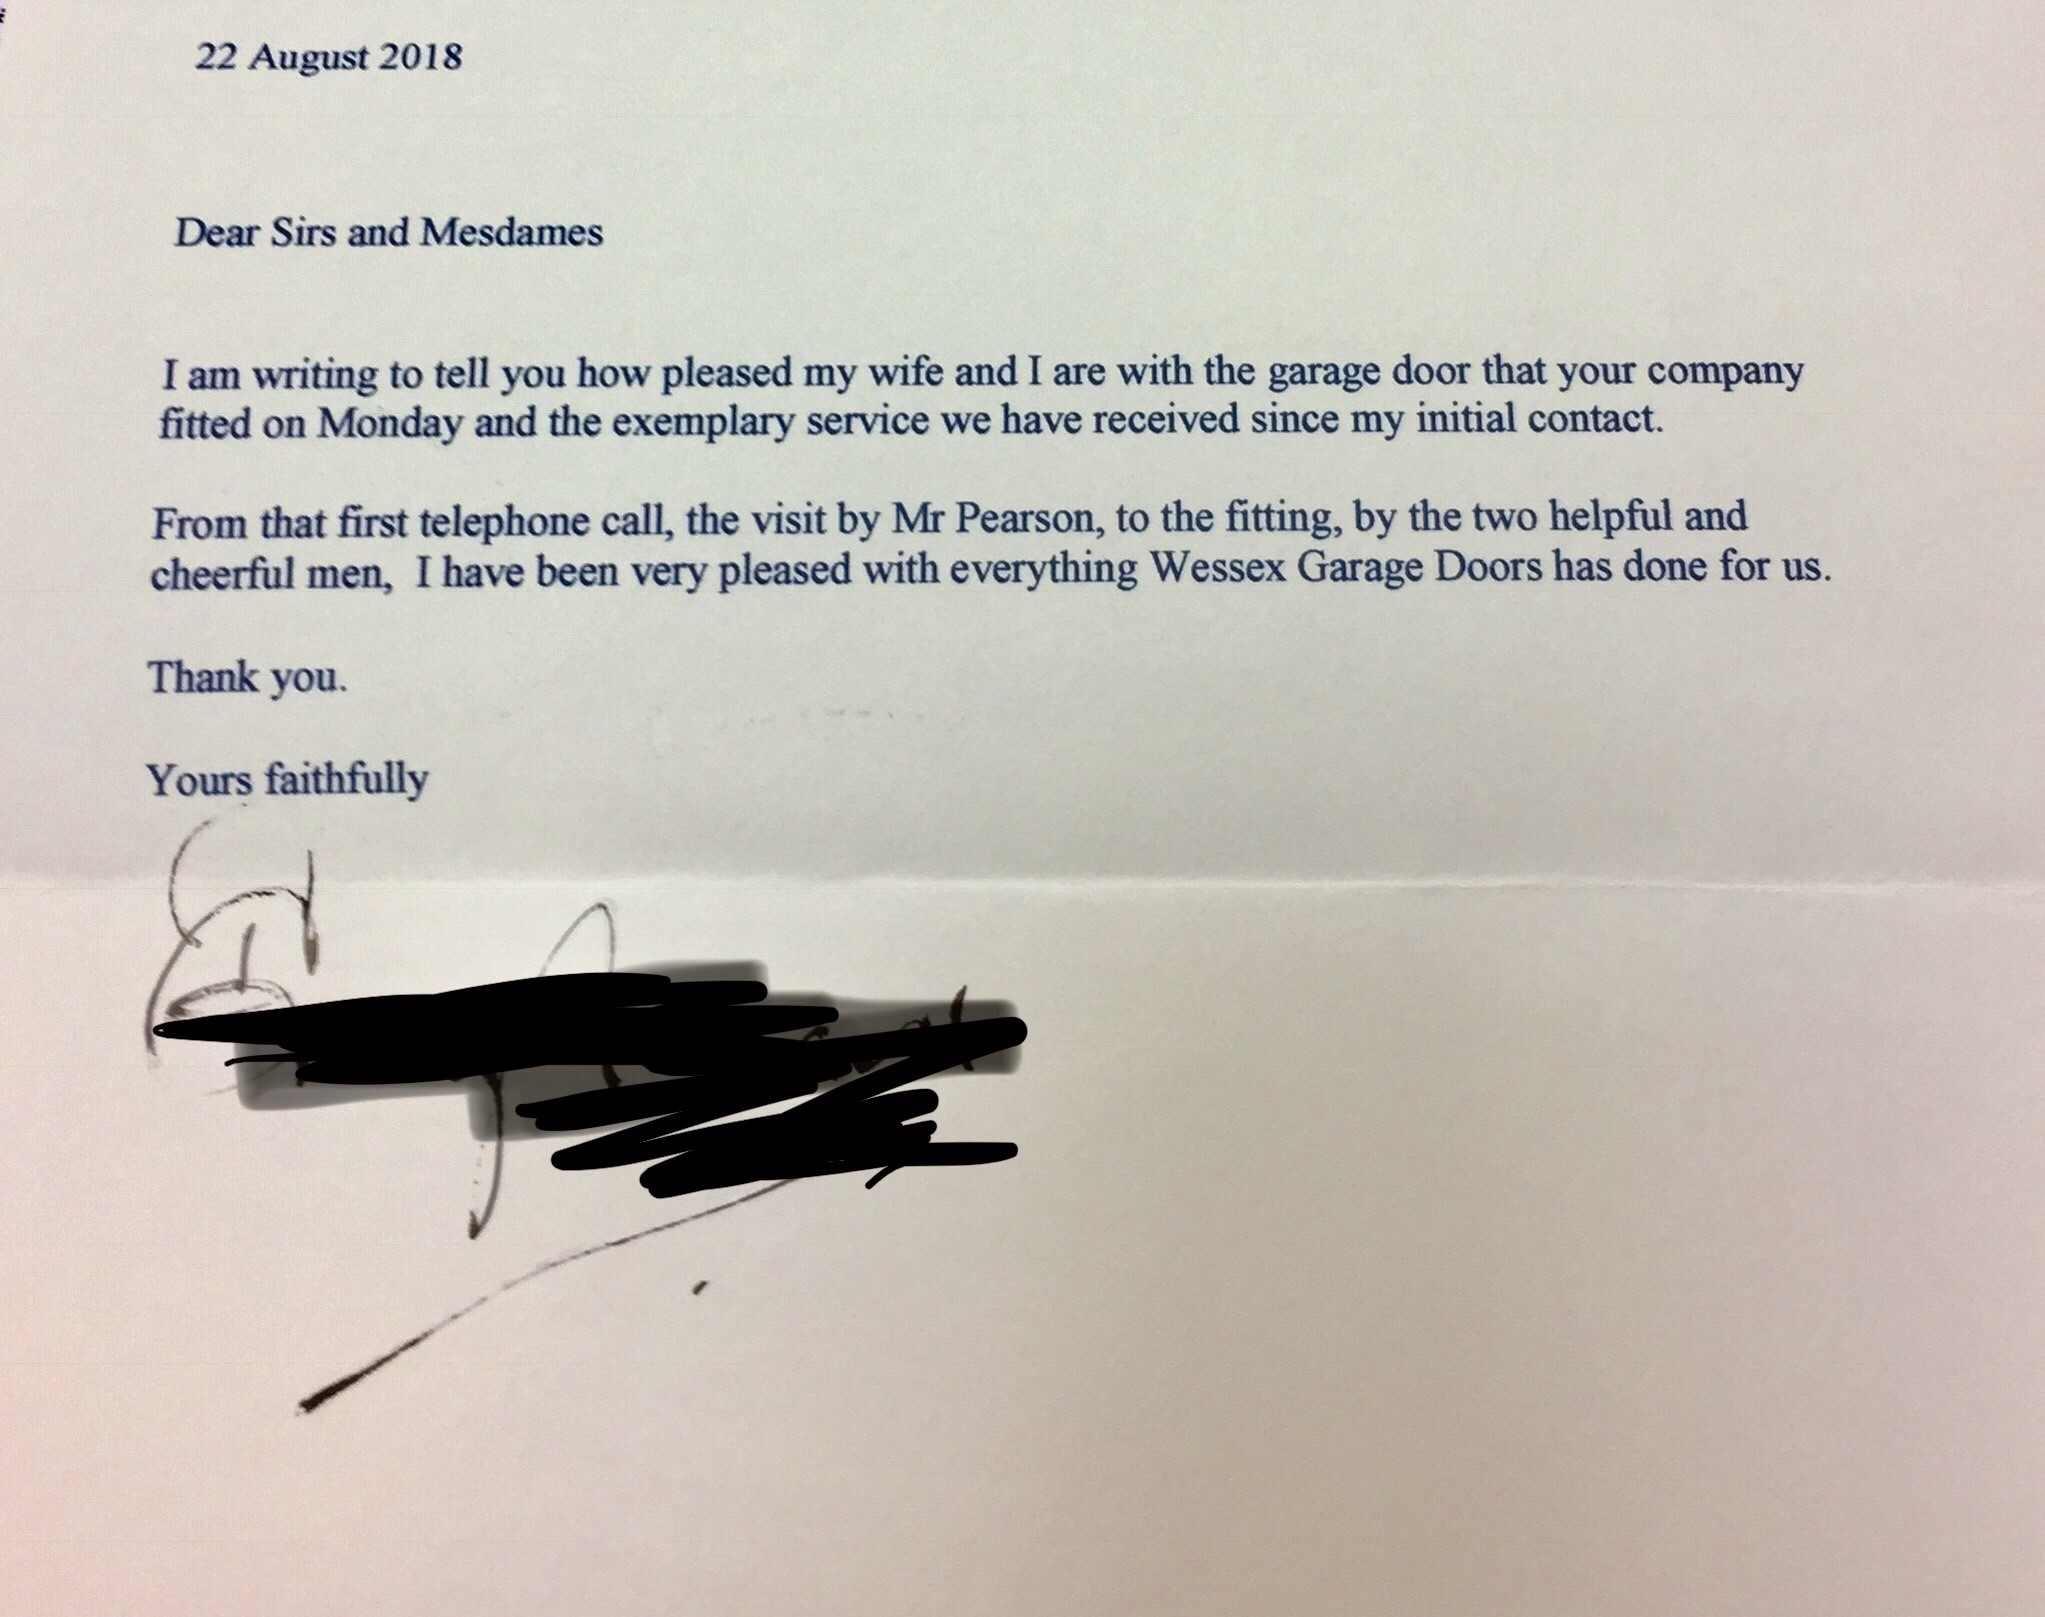 Customer letter advising they were pleased with Wessex Garage Doors service they received